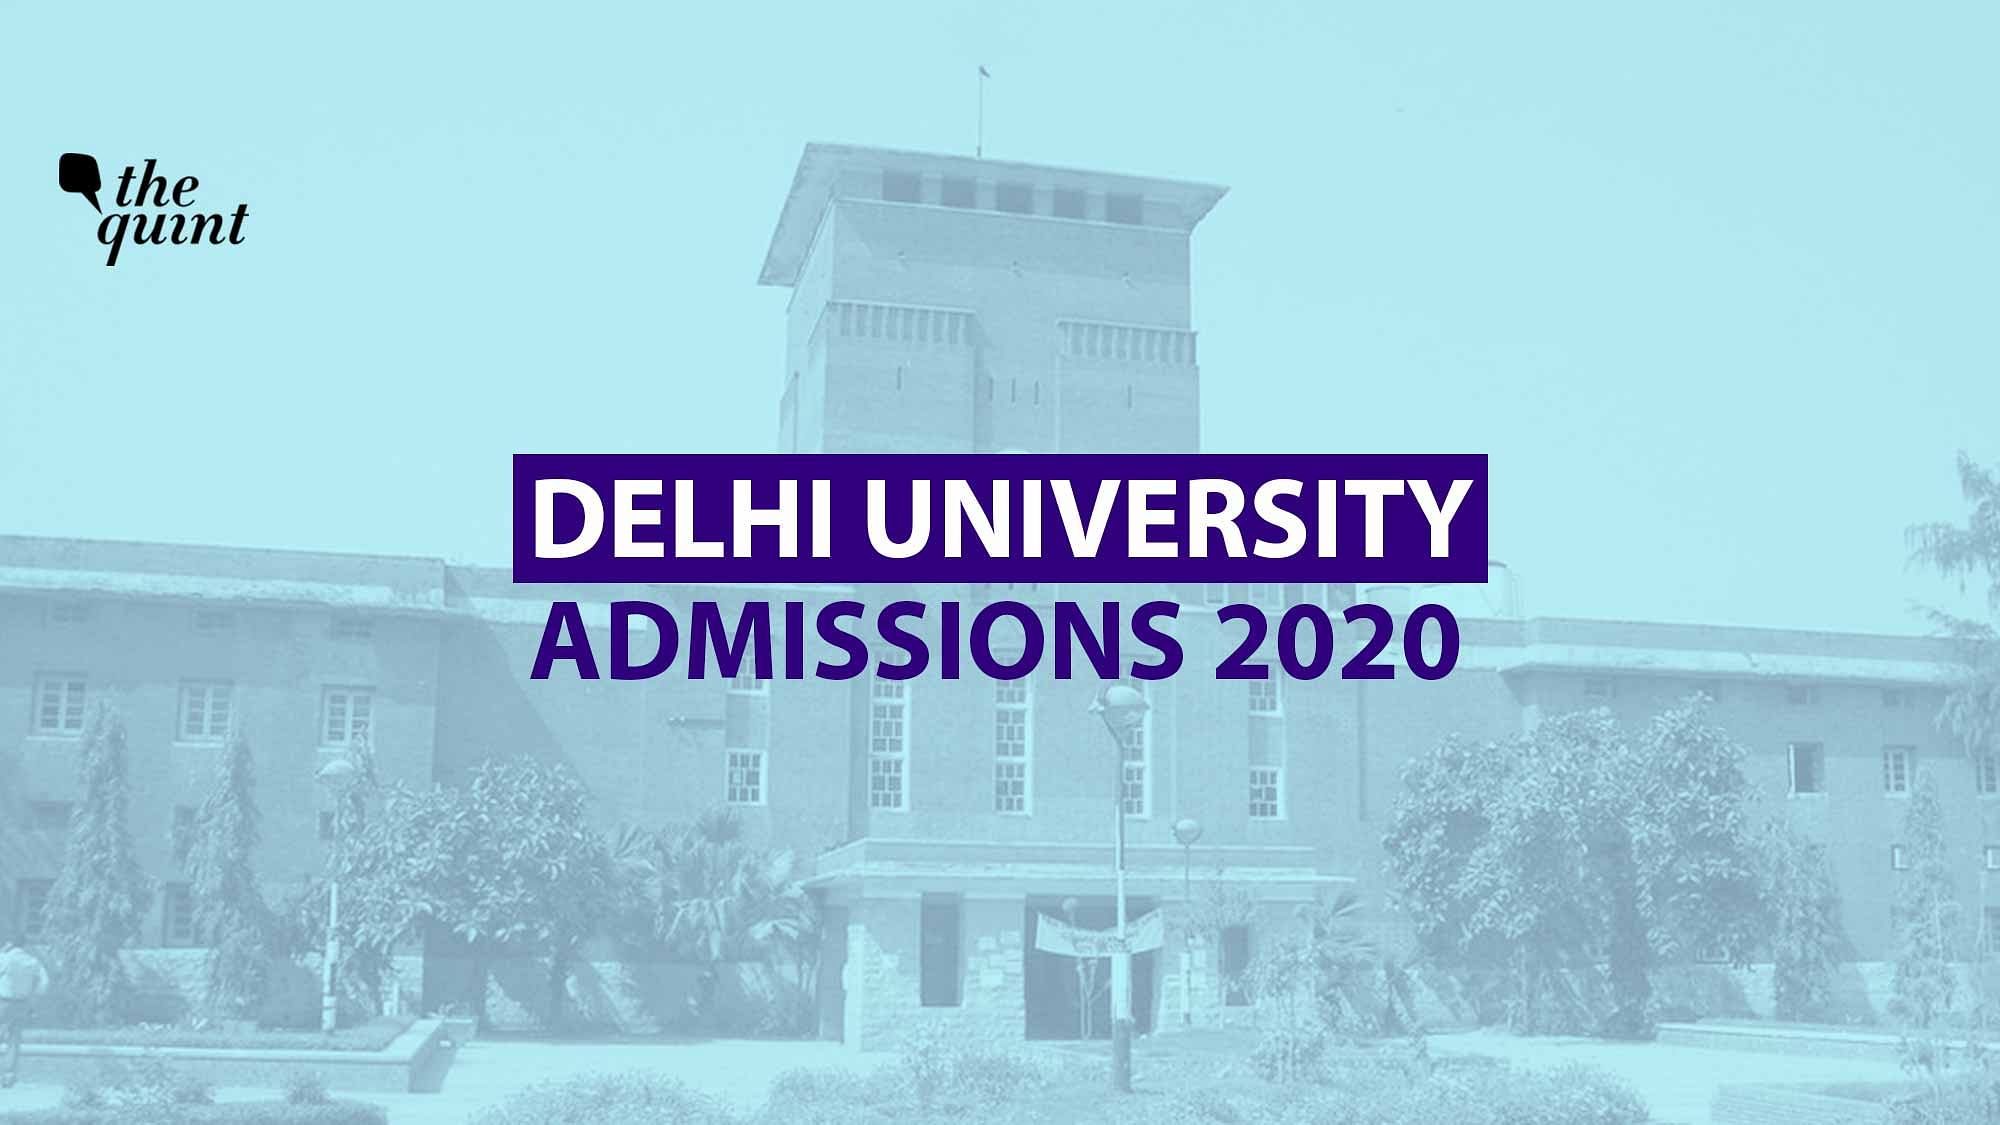 Delhi University has received a total of 3,53,717 applications this year.